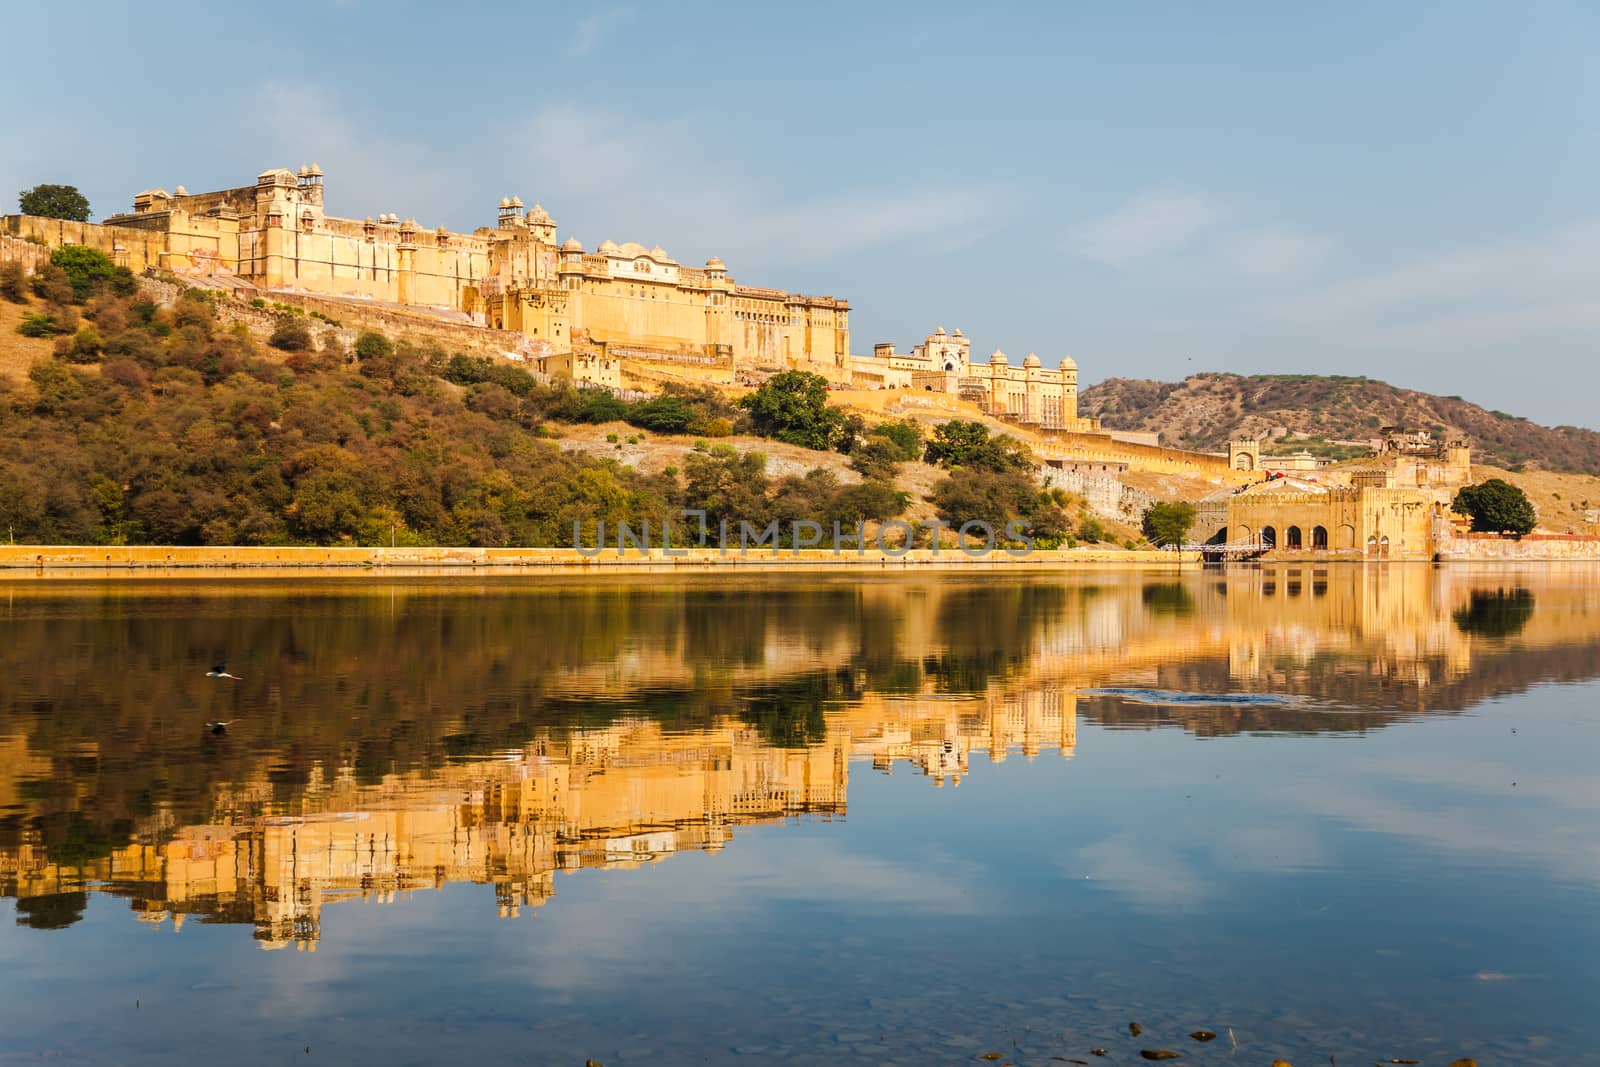 Amber Fort and the Palace located in Jaipur, Rajasthan State, India